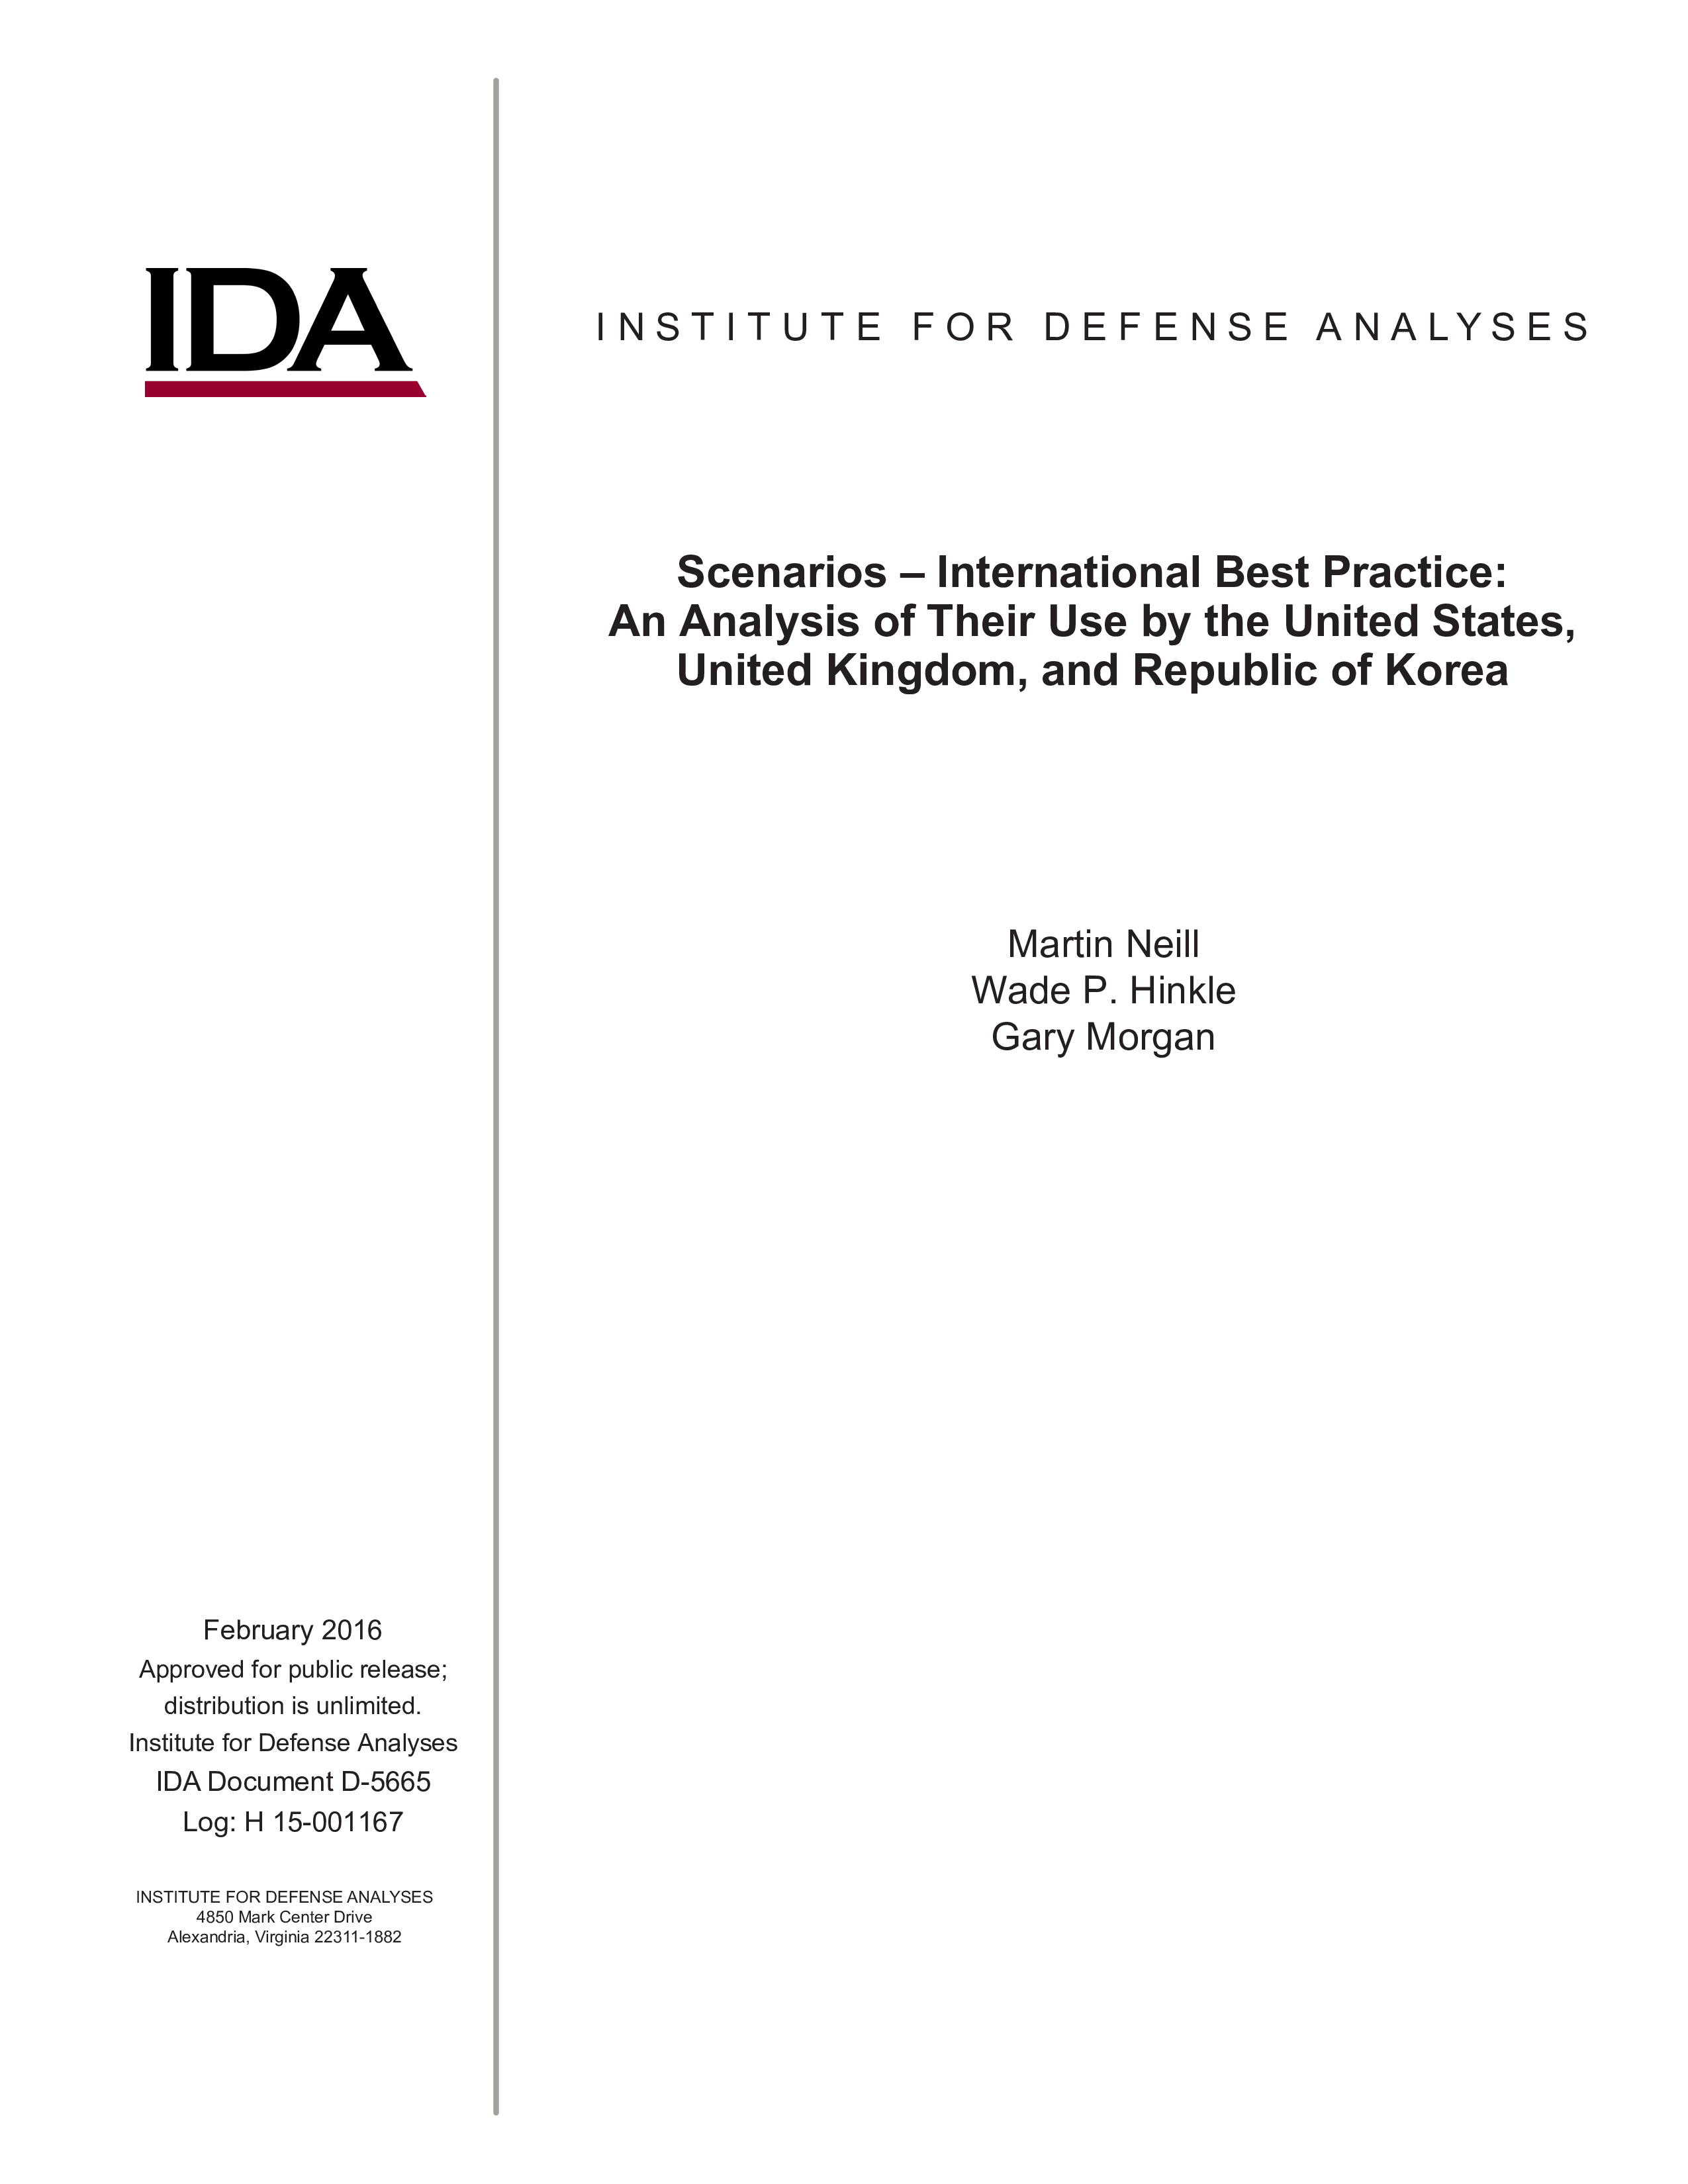 Scenarios – International Best Practice: An Analysis of Their Use by the United States, United Kingdom, and Republic of Korea cover image